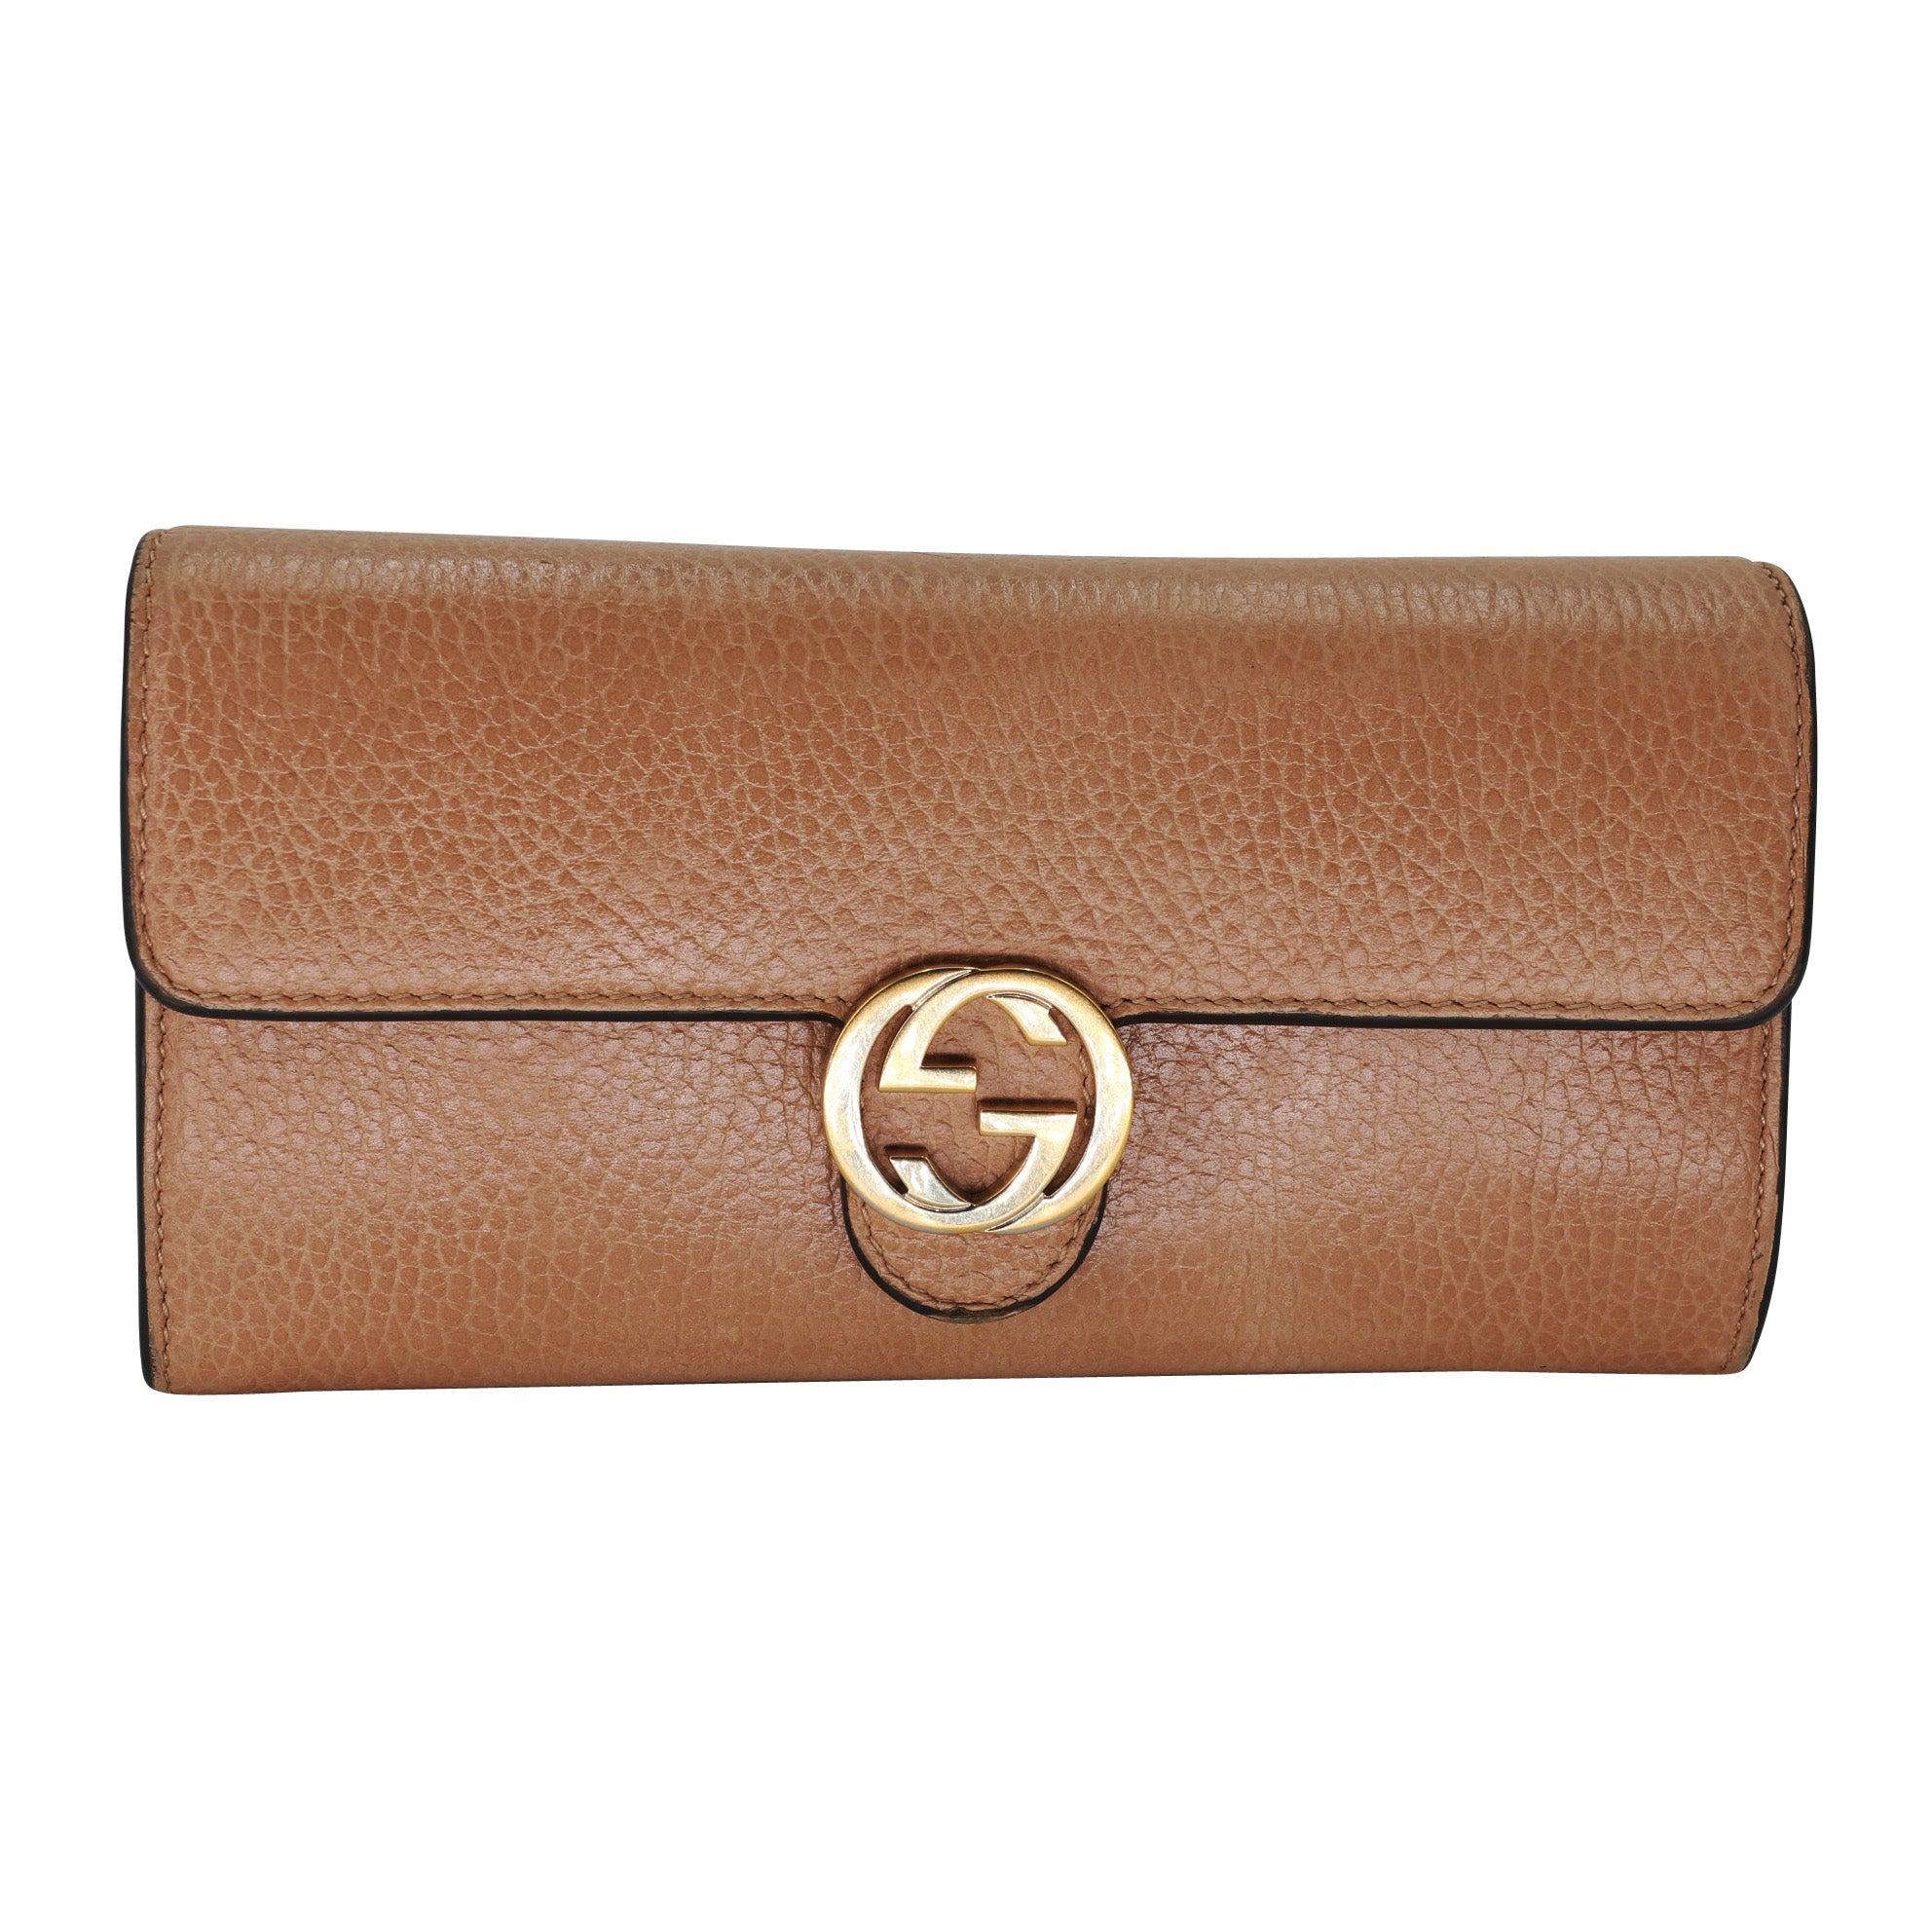 Gucci continues to reinterpret the GG logo with a modern honey brown leather, yet classic designs. This wallet features the distinctive big GG logo with gold detail. Long wallet with push lock closure and elegant design. Wallet is in pre-loved